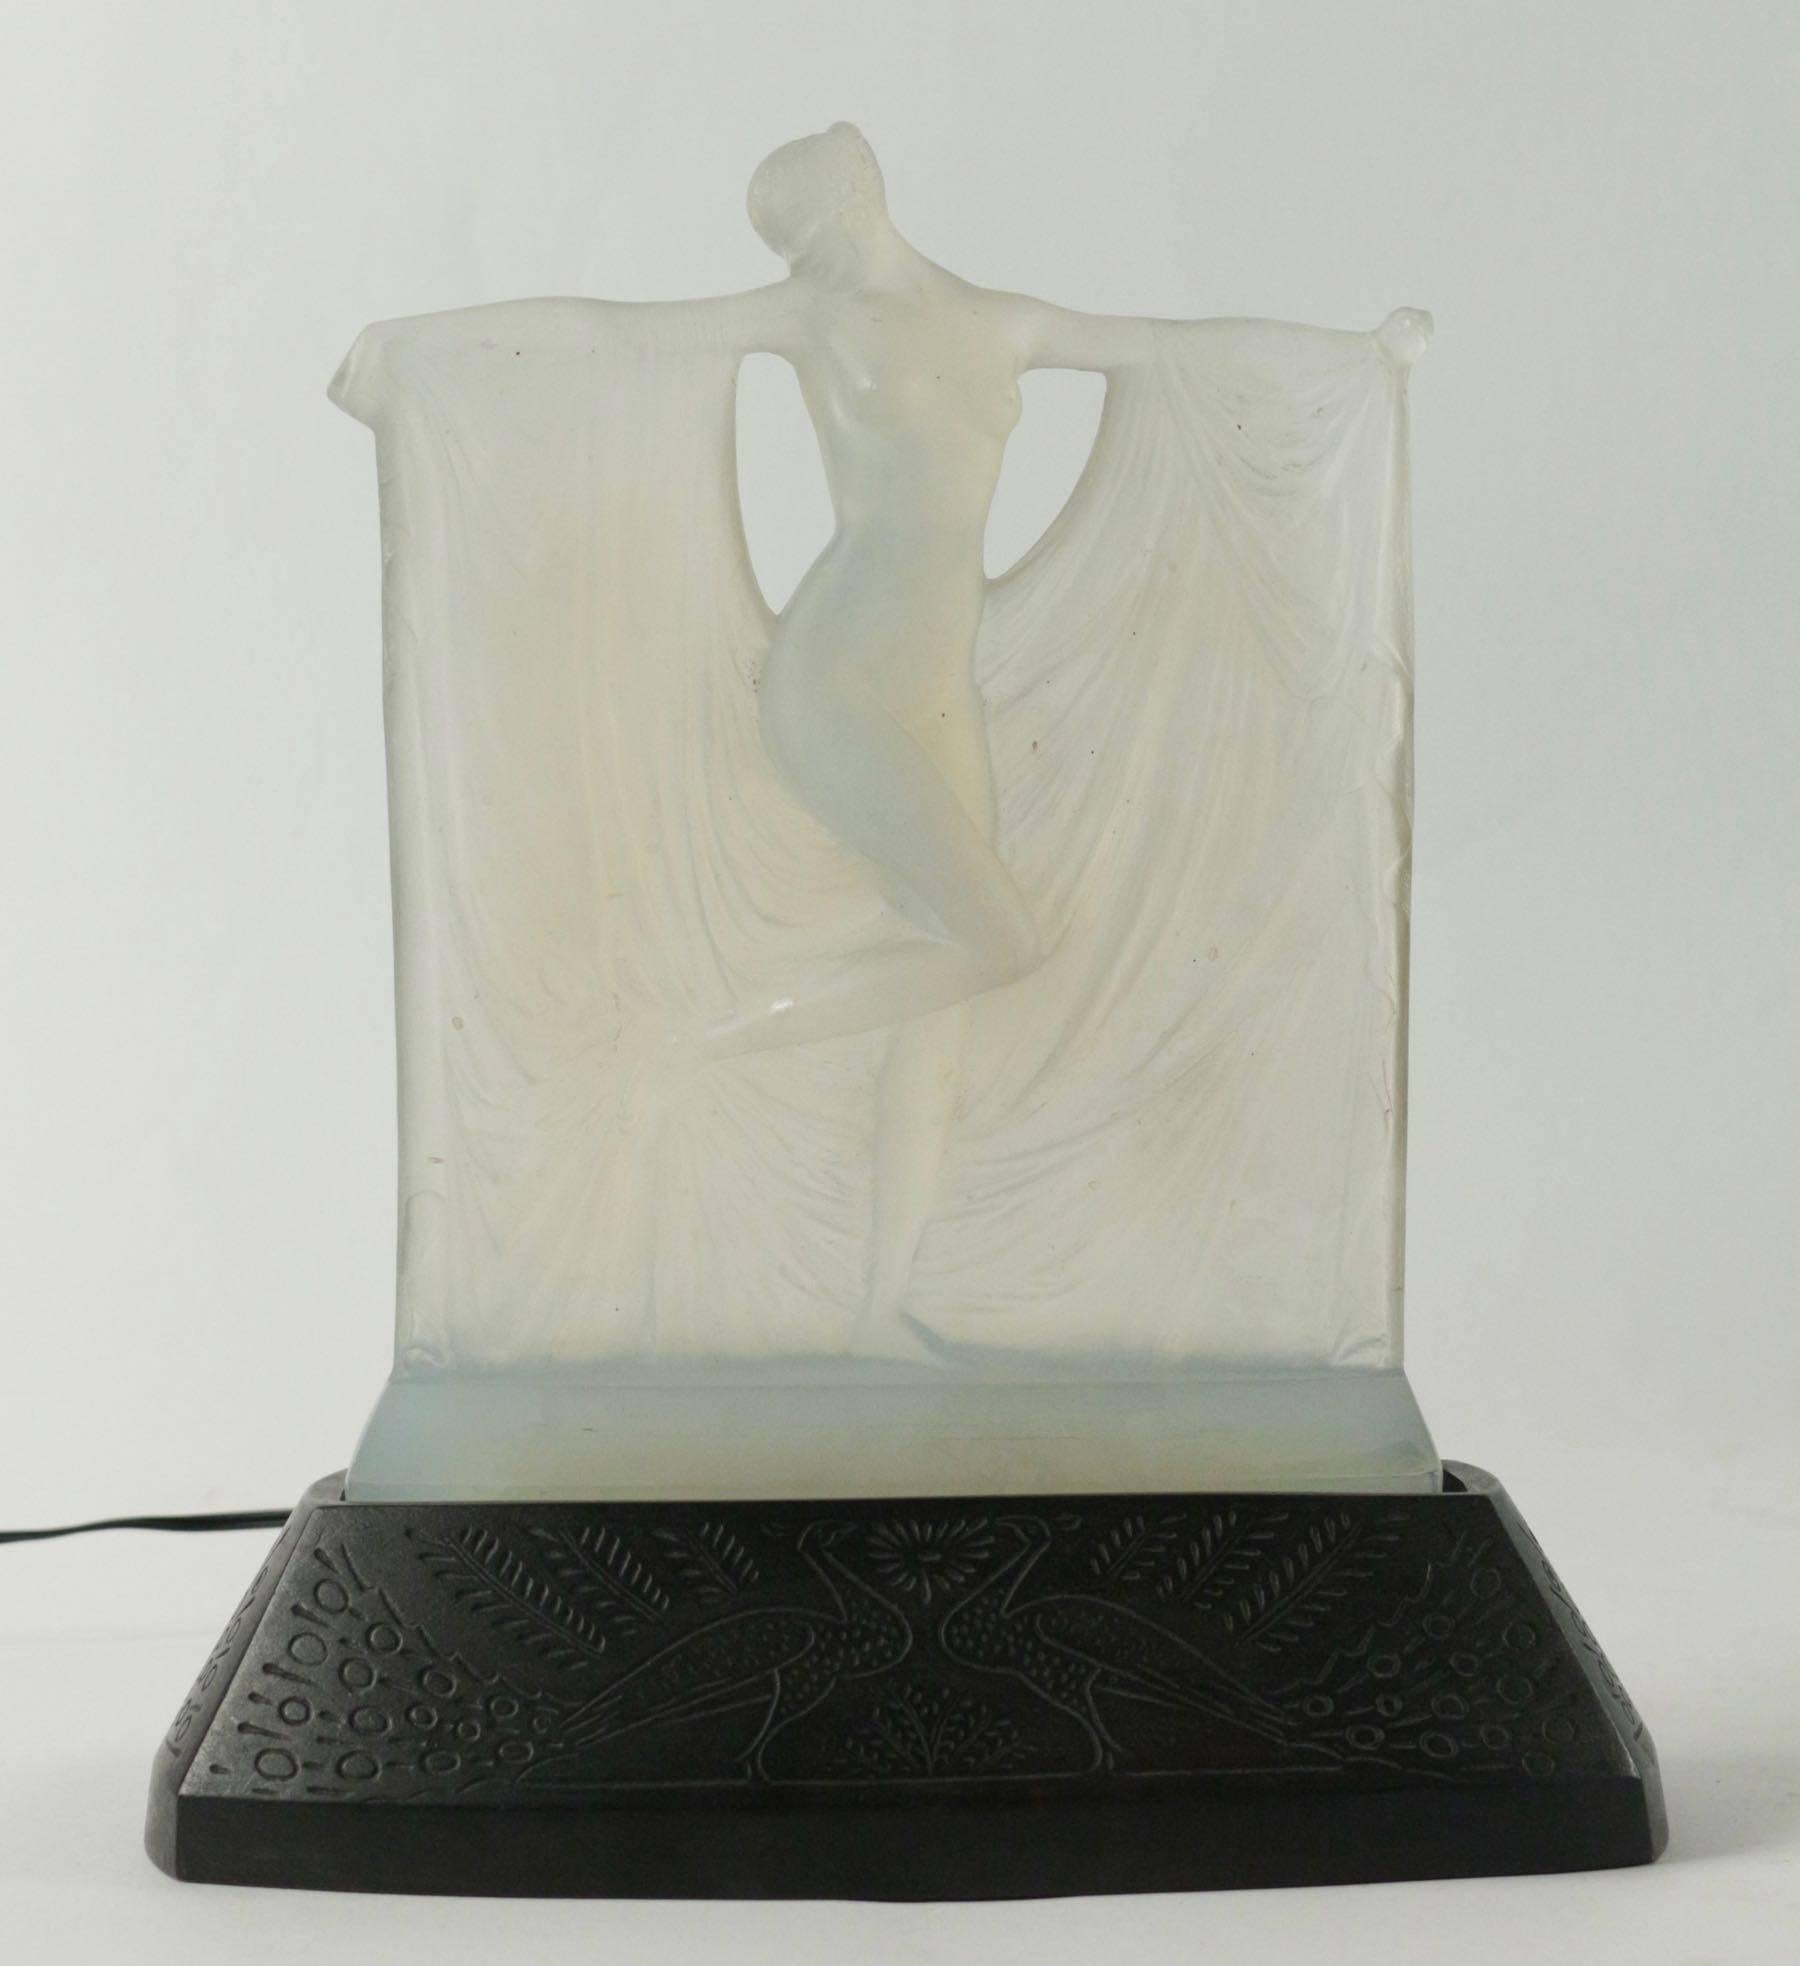 R. Lalique
Opalescent glass statuette, by René Lalique, moulded as a maiden amidst drapery held by her outstretched arms, signature to rear of the figure above base, moulded in relief, R.Lalique.
Hand has been glued see picture. We can see a fine